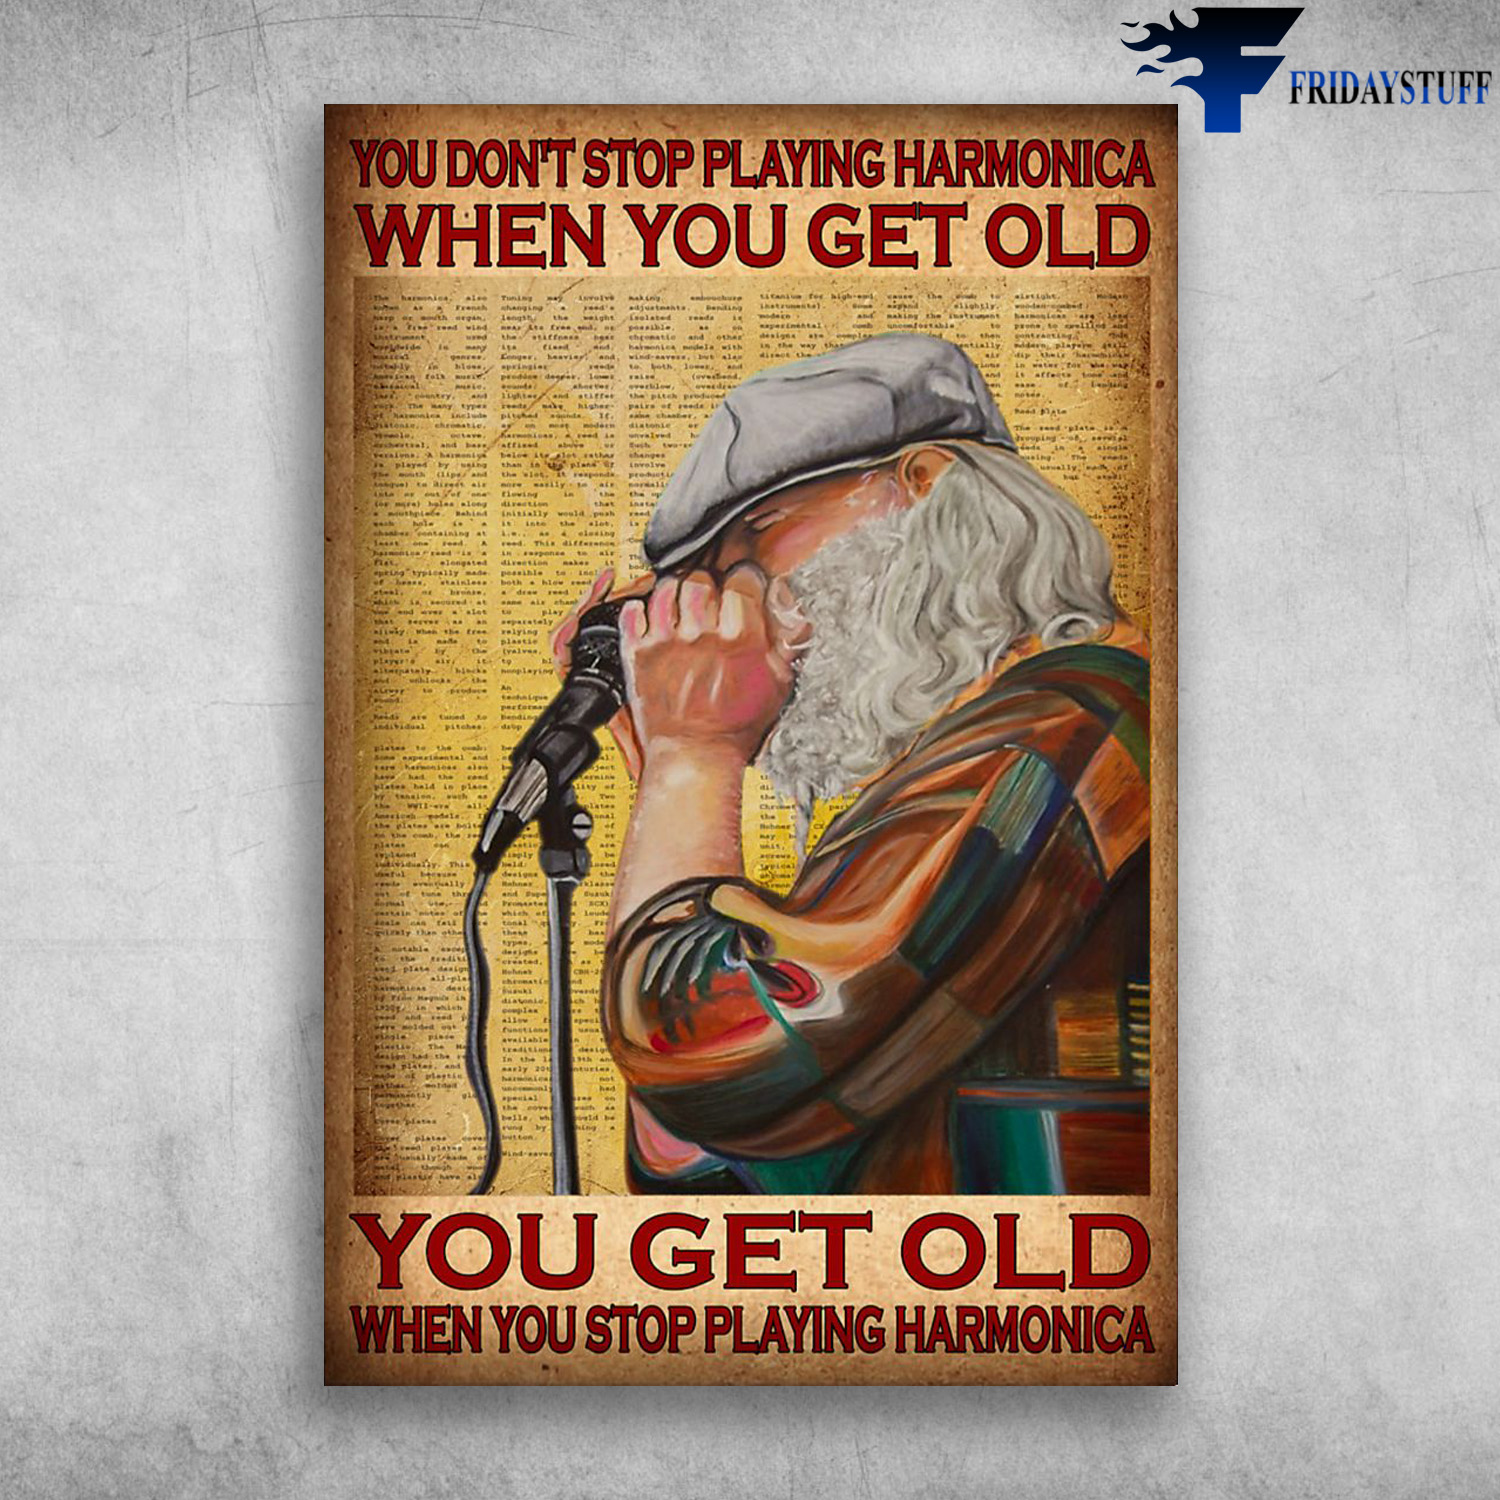 Old Man Playing Harmonica - You Don't Stop Playing Harmonica When You Get Old, You Get Old When You Stop Playing Harmonica